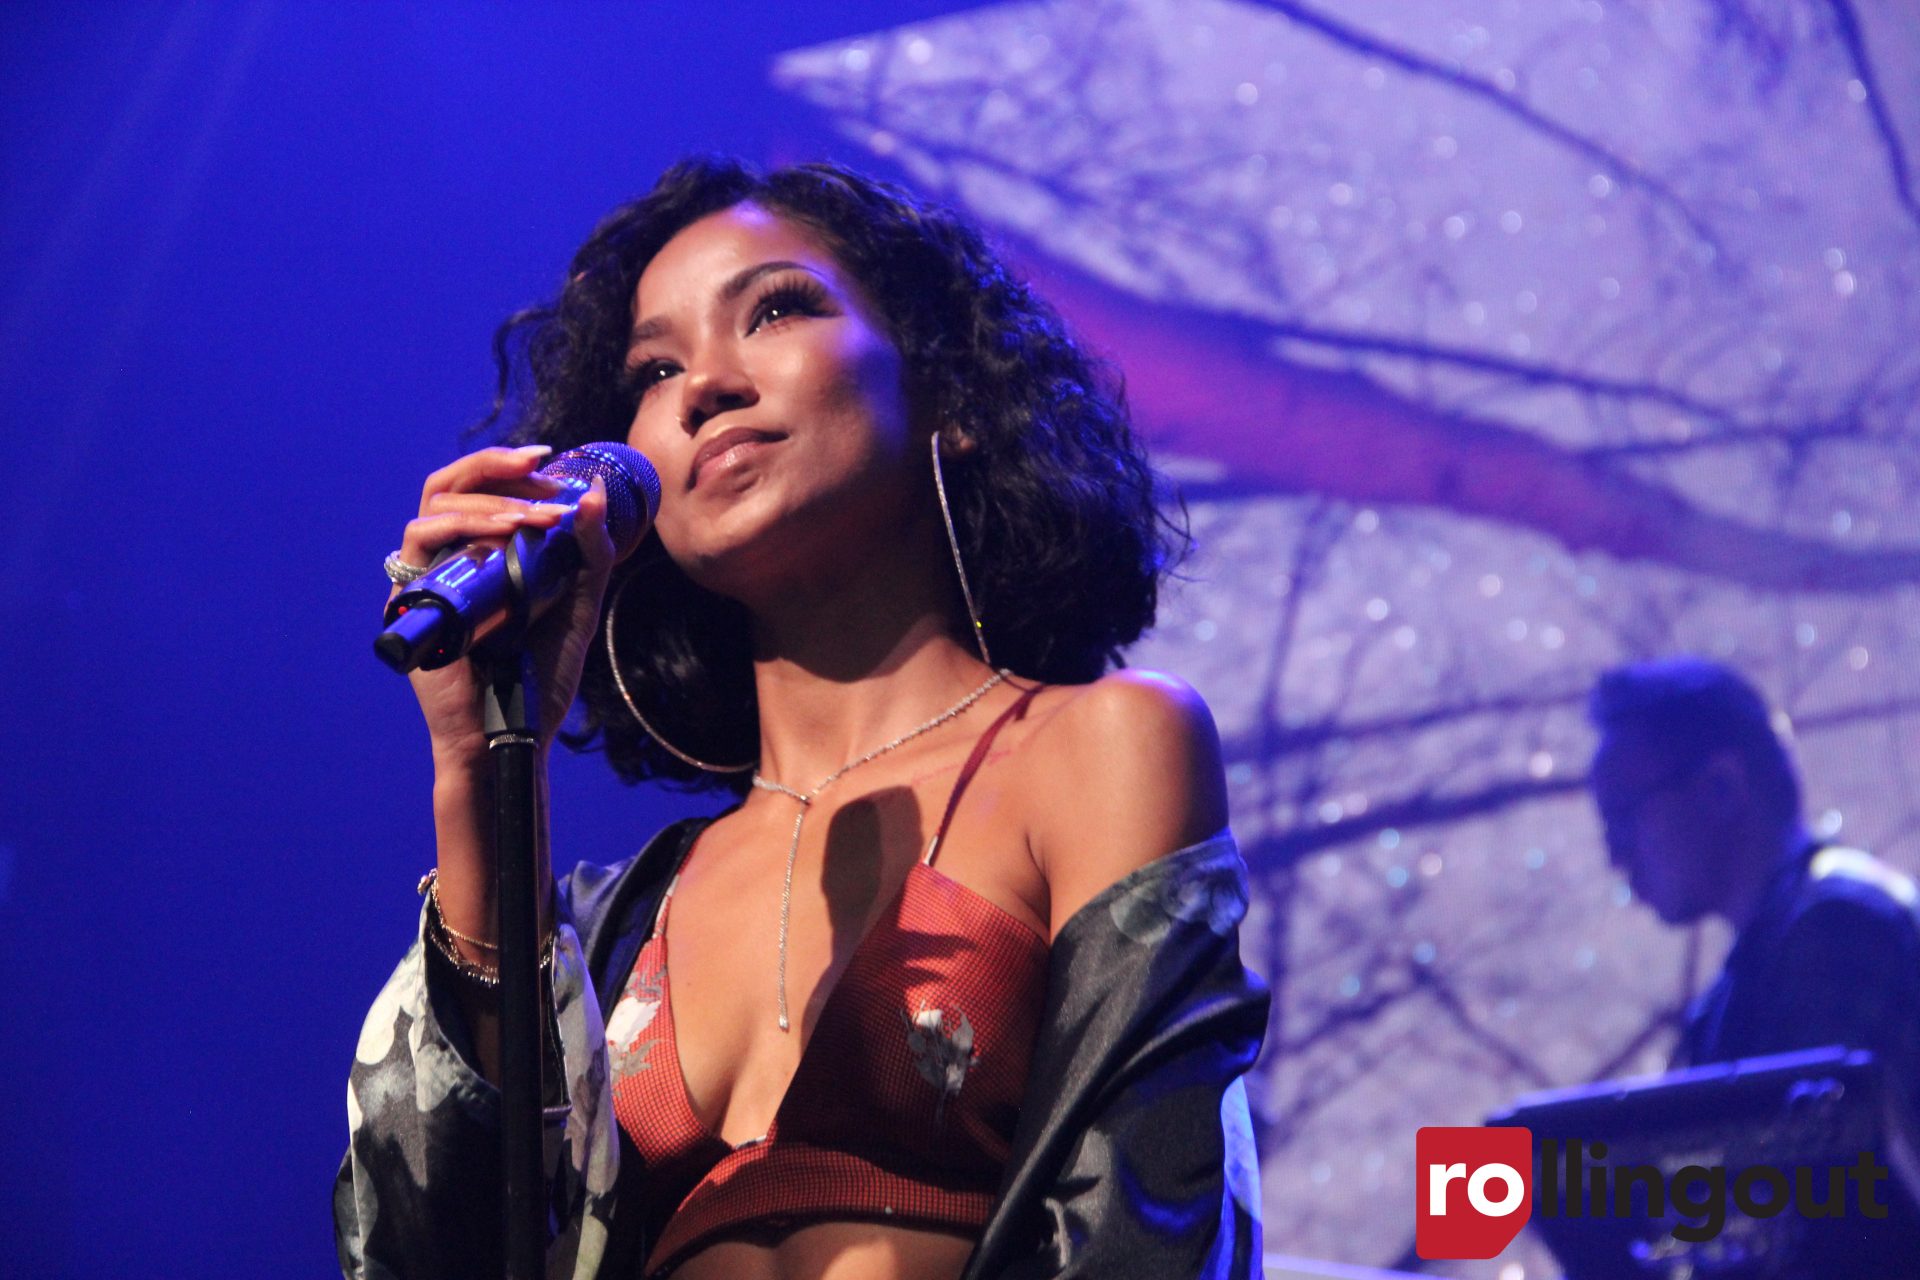 Jhene Aiko gives a peek of baby while breastfeeding (video)